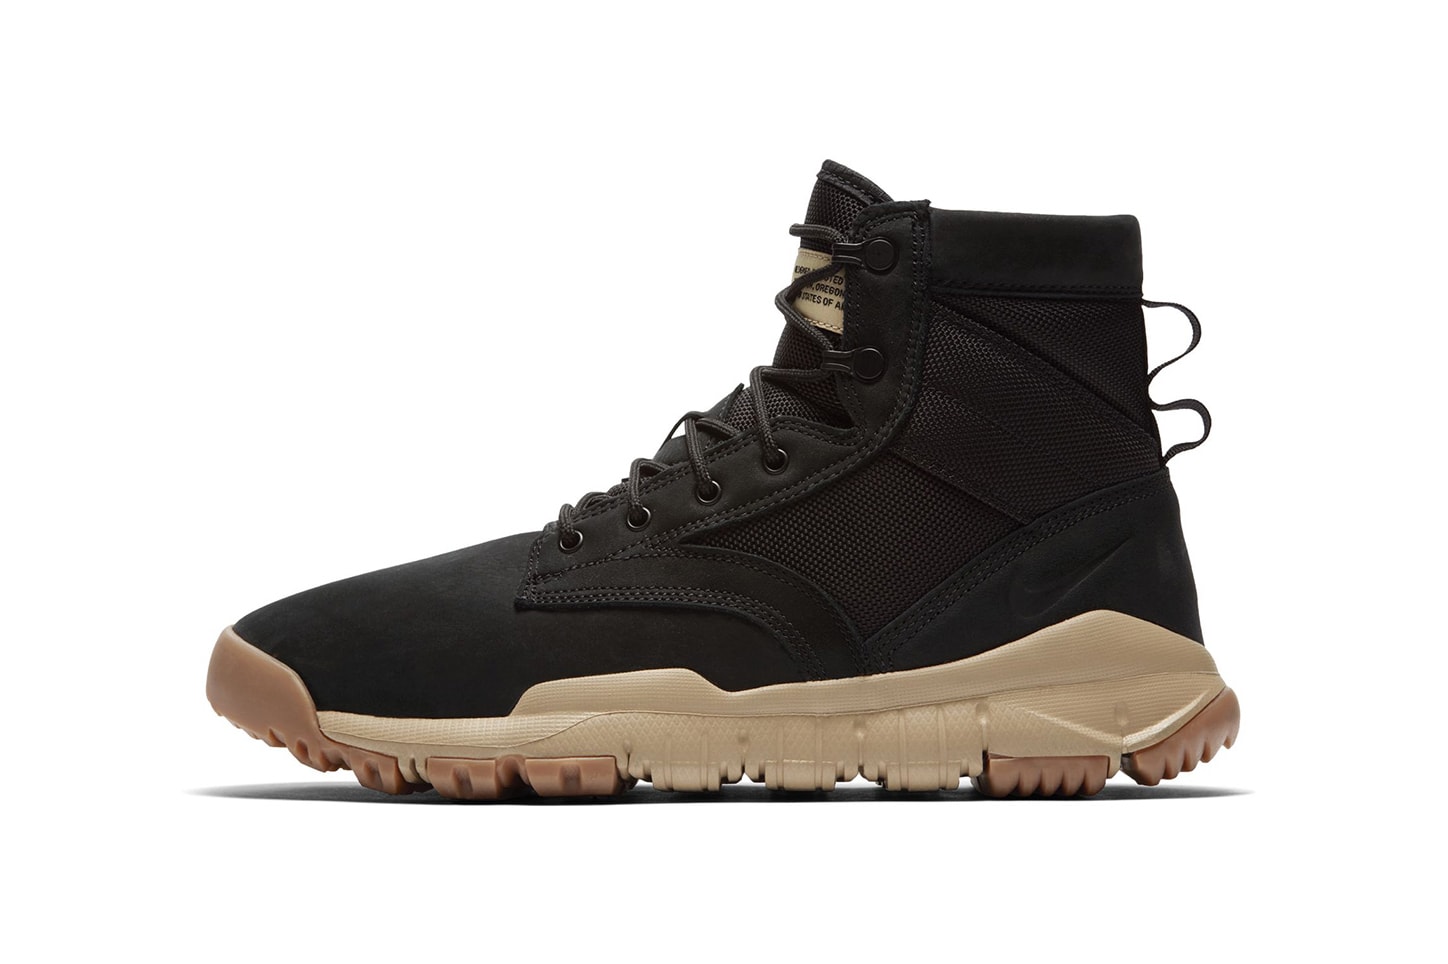 Nike SFB 6 Inch NSW Leather Black Mushroom Gum Sole Boot Sneakers Shoes Footwear Release Info October